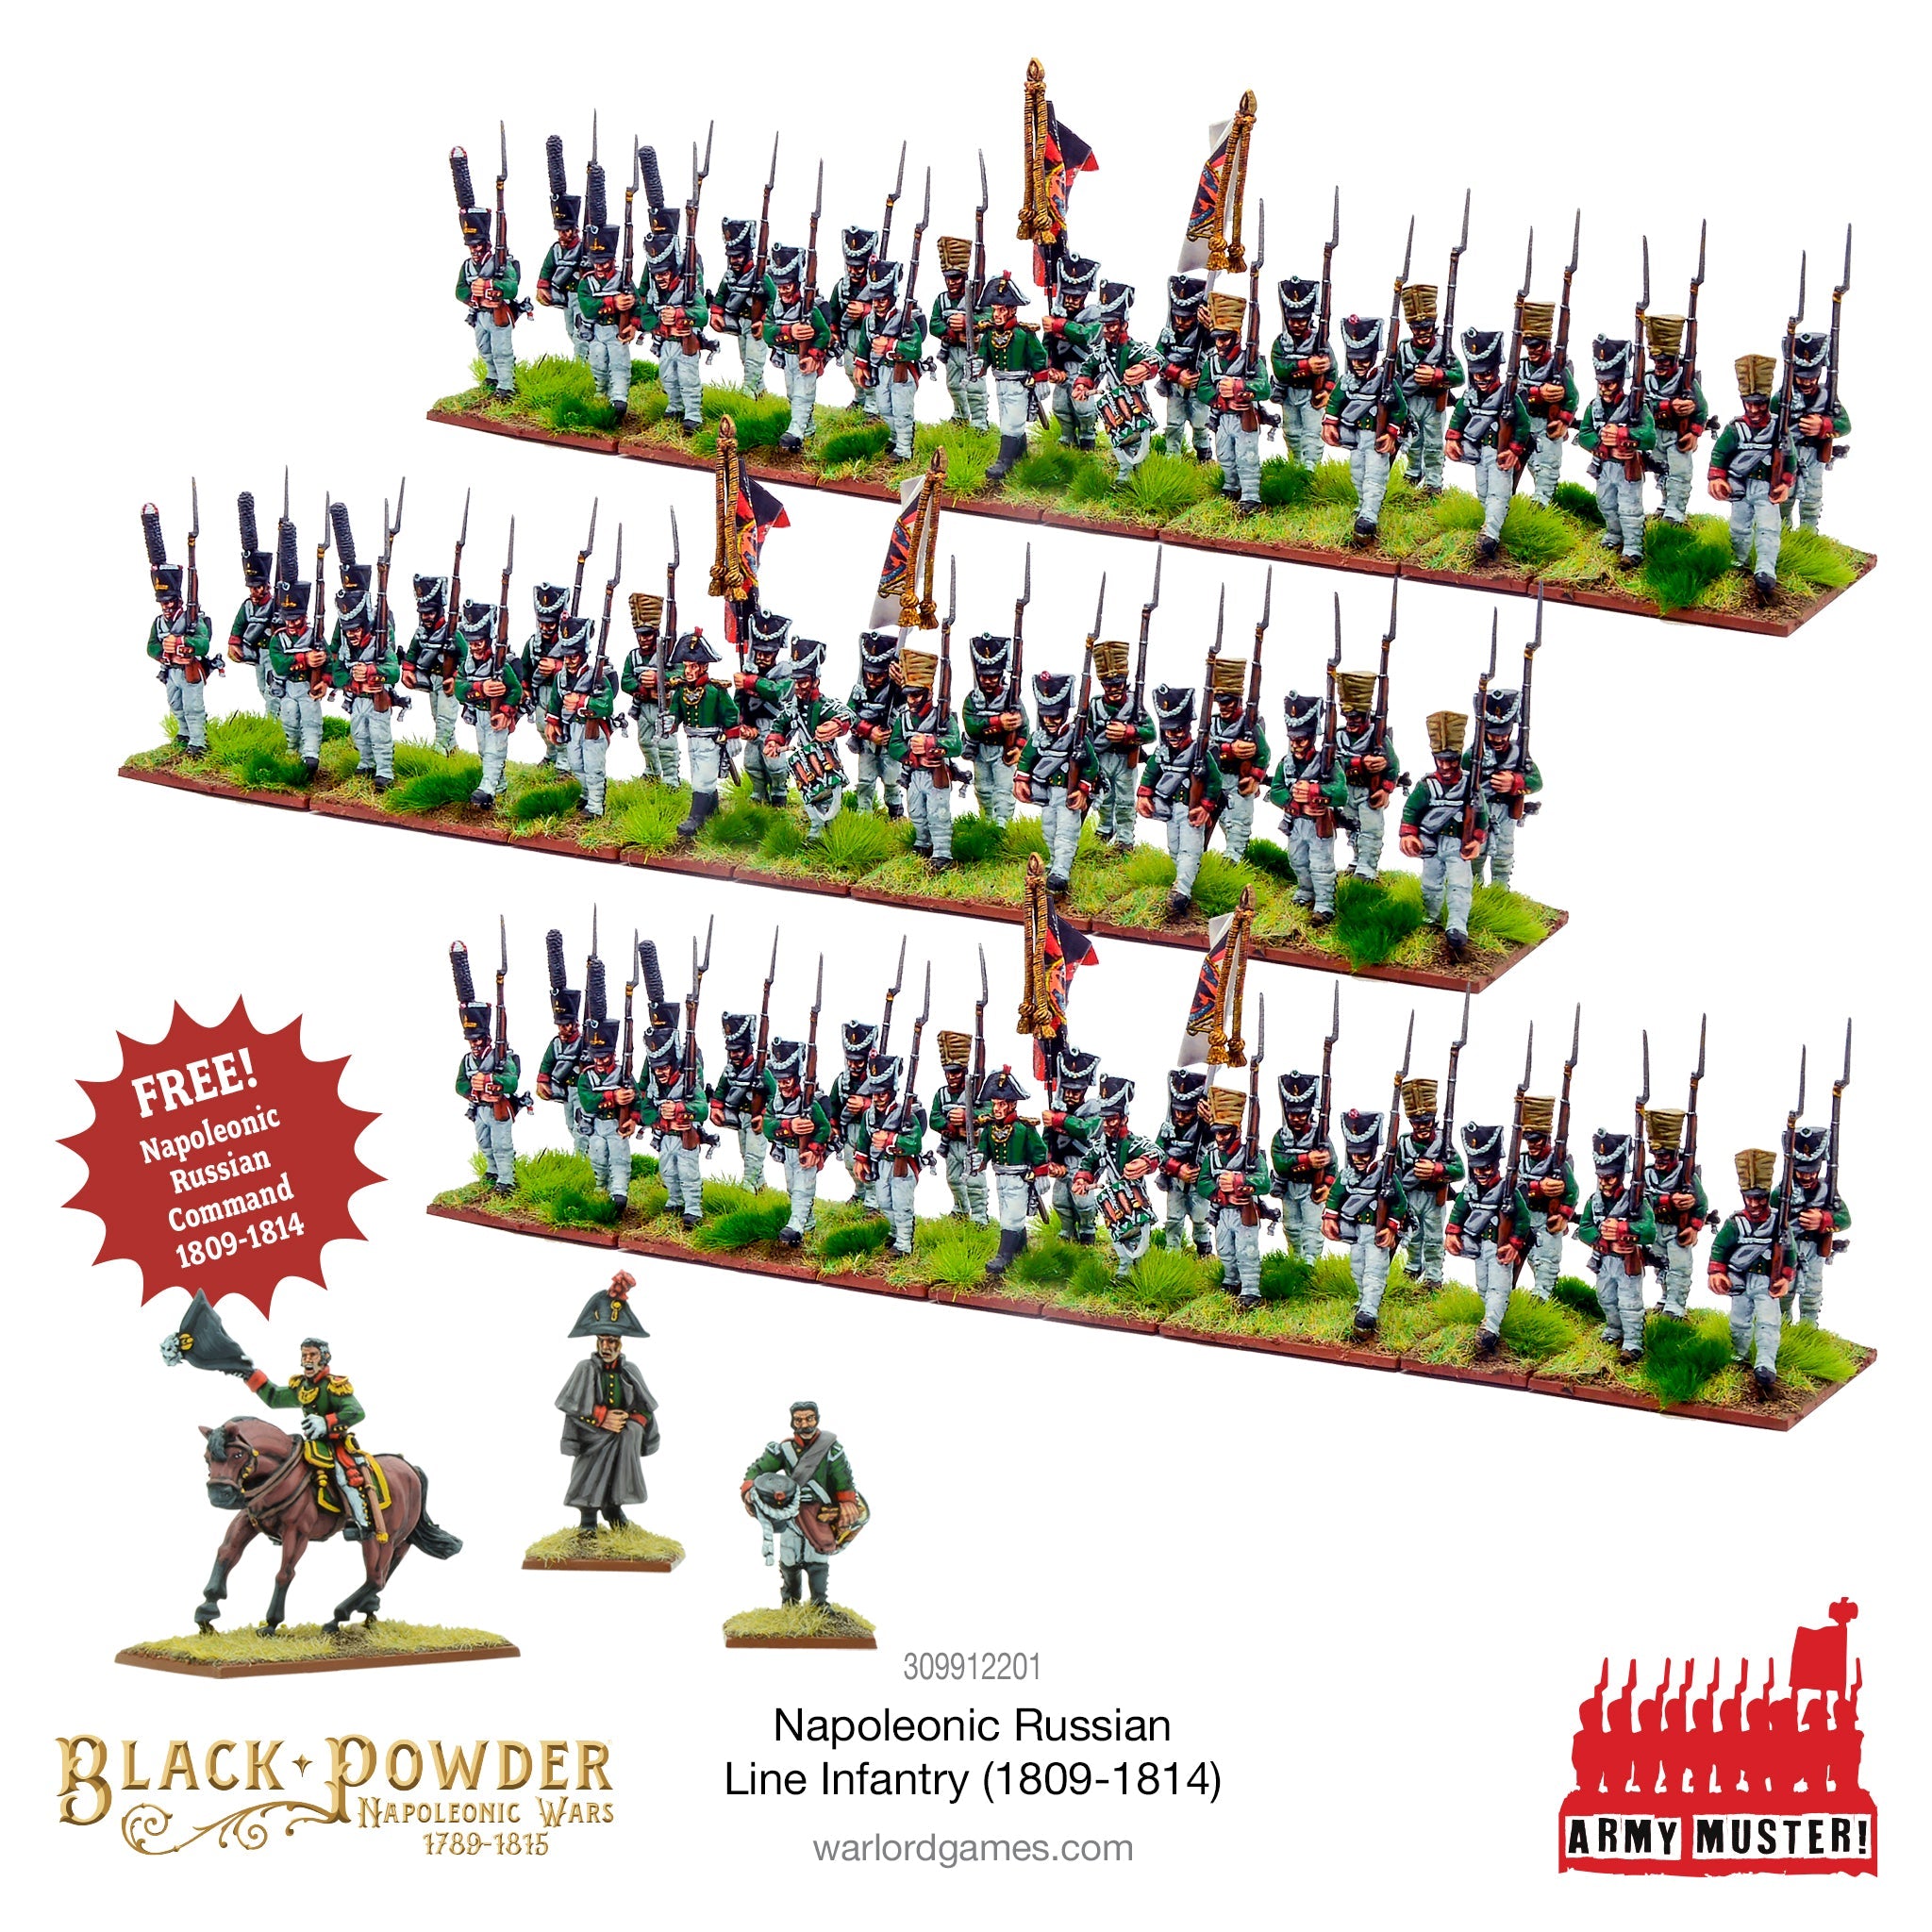 Army Muster: Napoleonic Russian Line Infantry (1809-1814)